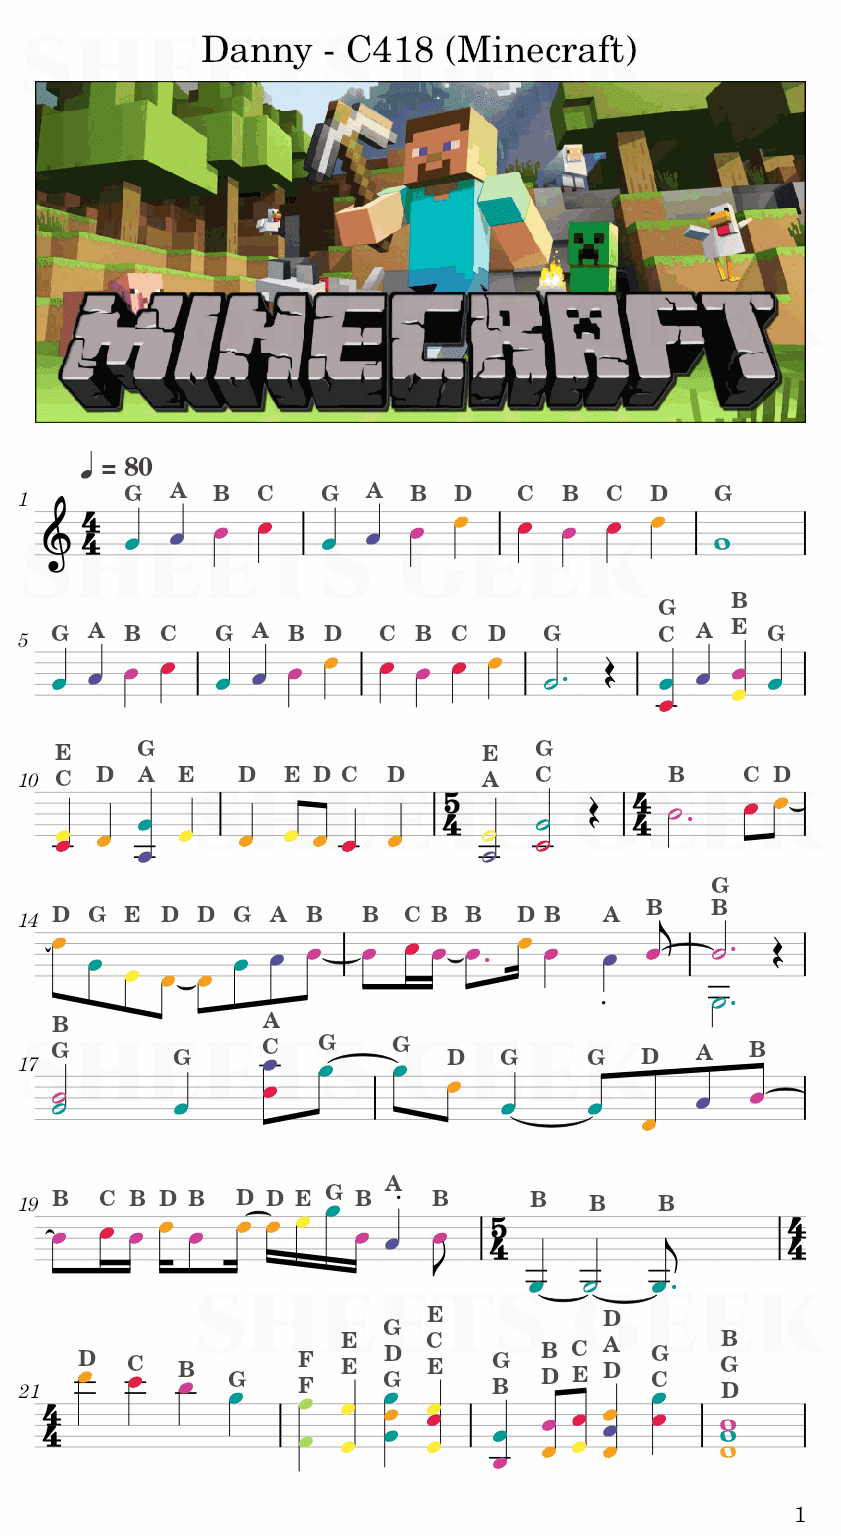 Danny - C418 (Minecraft) Easy Sheet Music Free for piano, keyboard, flute, violin, sax, cello page 1